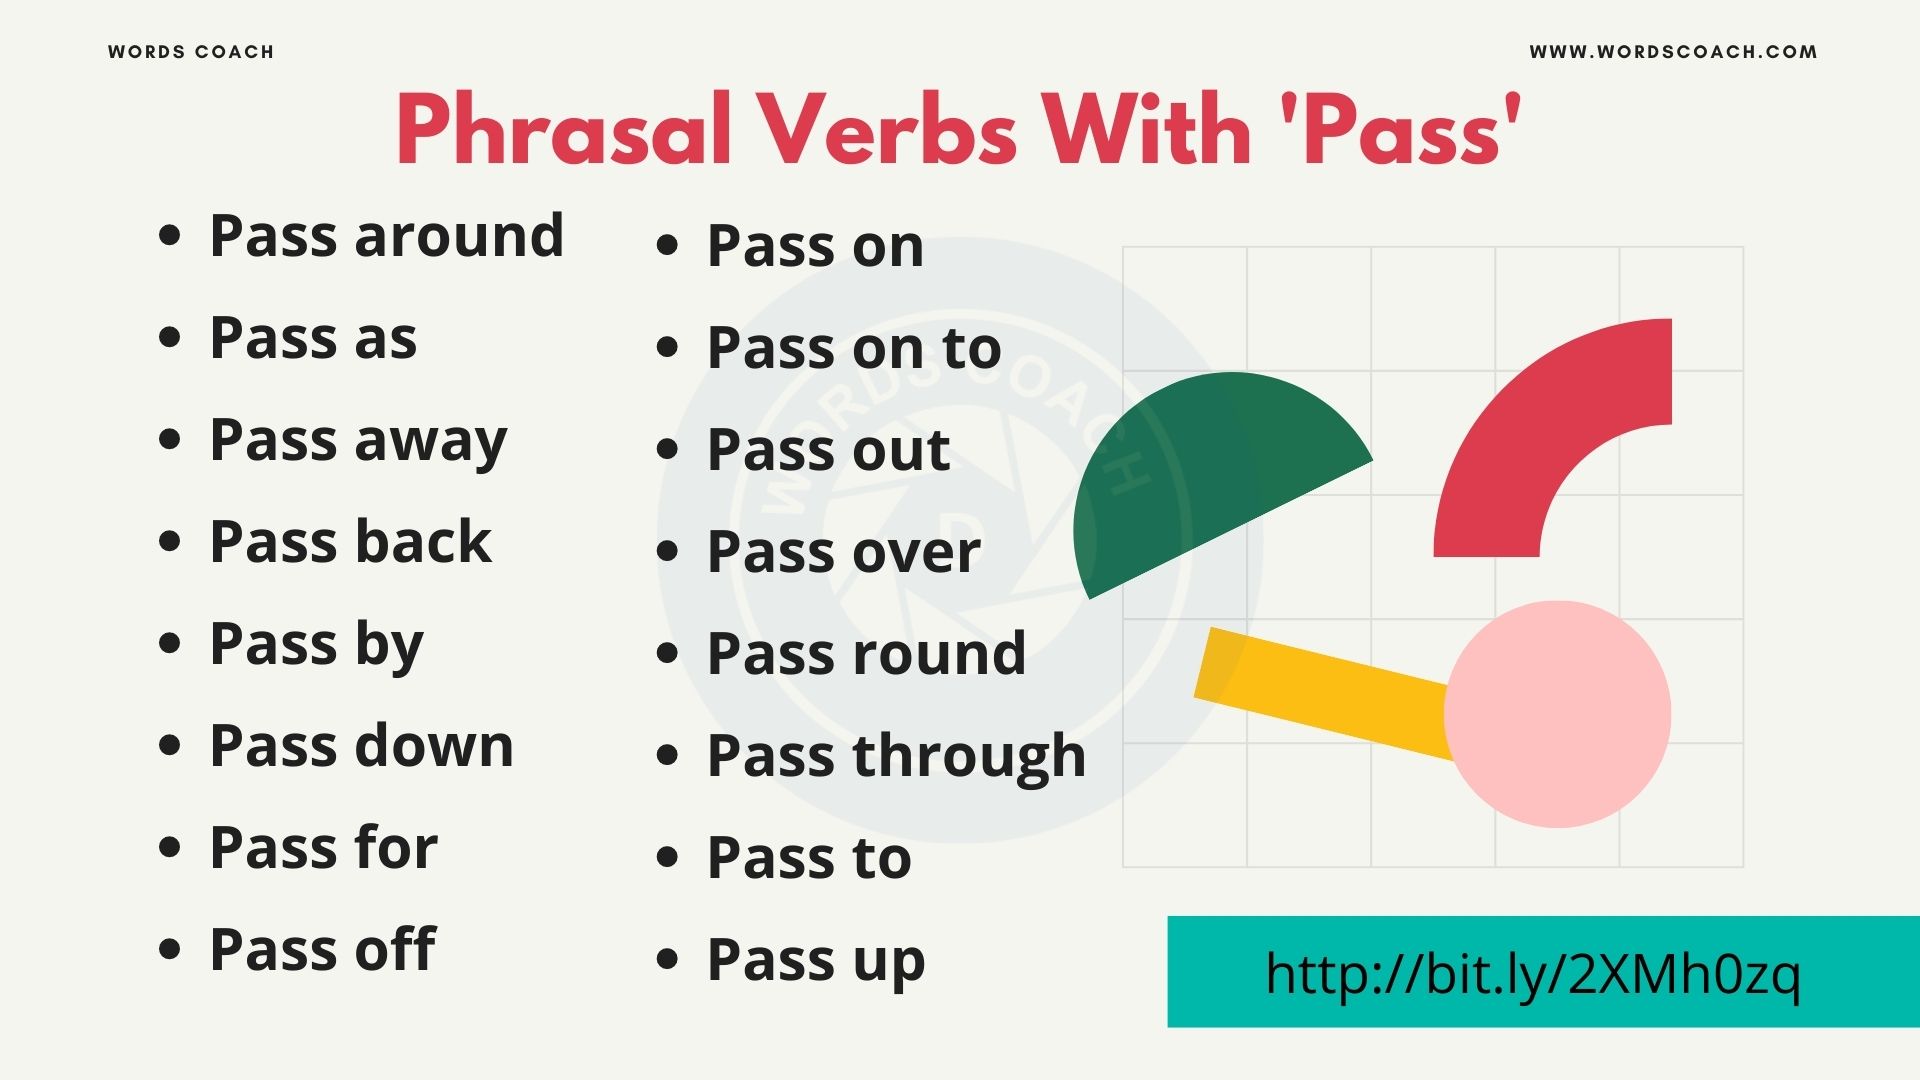 Phrasal Verbs With 'Pass'